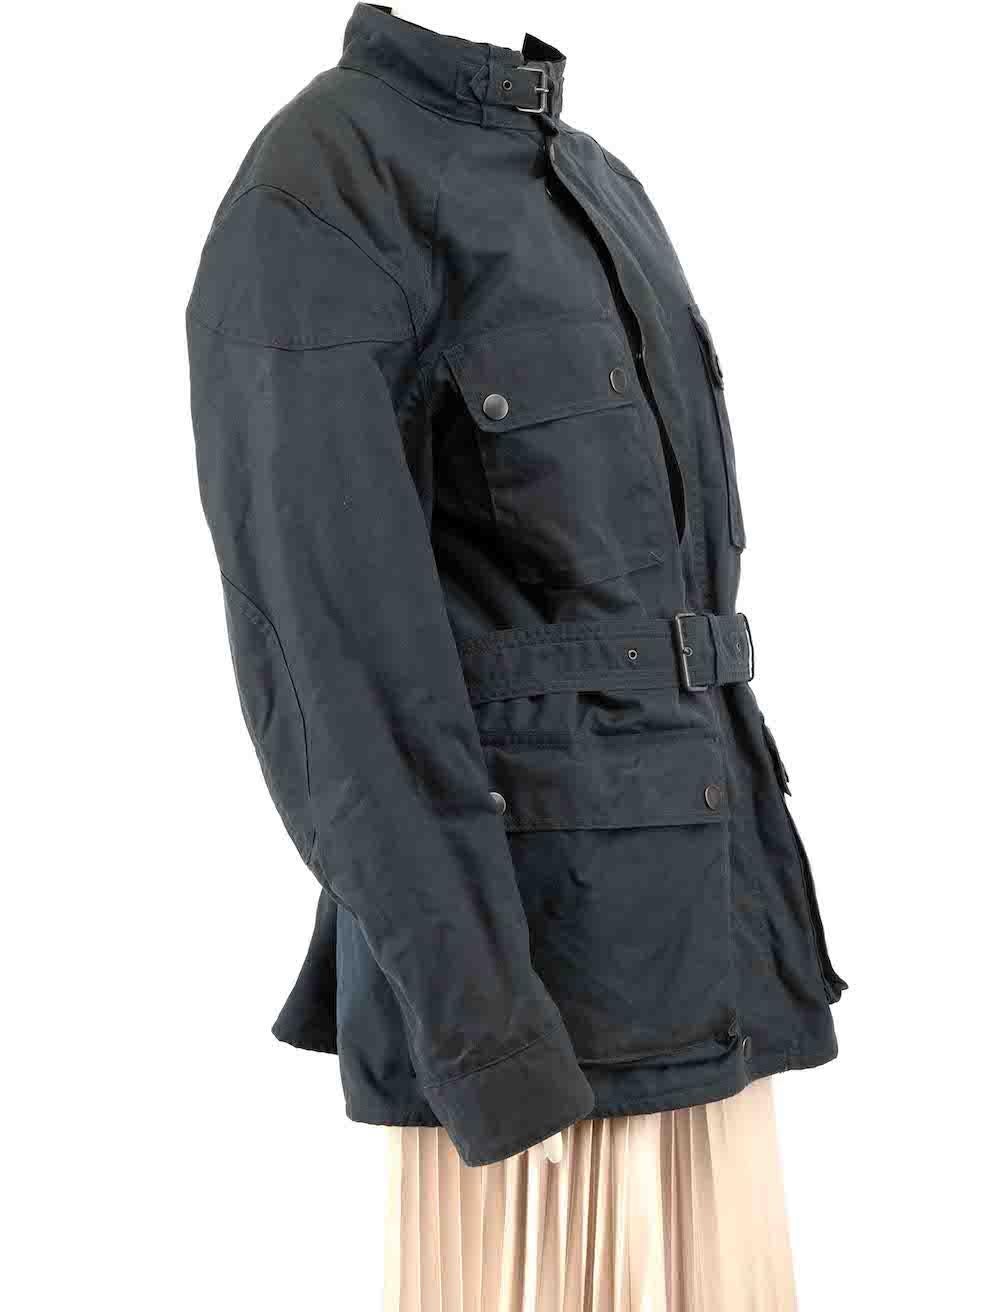 CONDITION is Good. General wear to coat is evident. Moderate signs of wear to the front, sleeves and belt with light marks across the fabric, and the lining has started pilling. The coat also has a musty odour on this used Belstaff designer resale